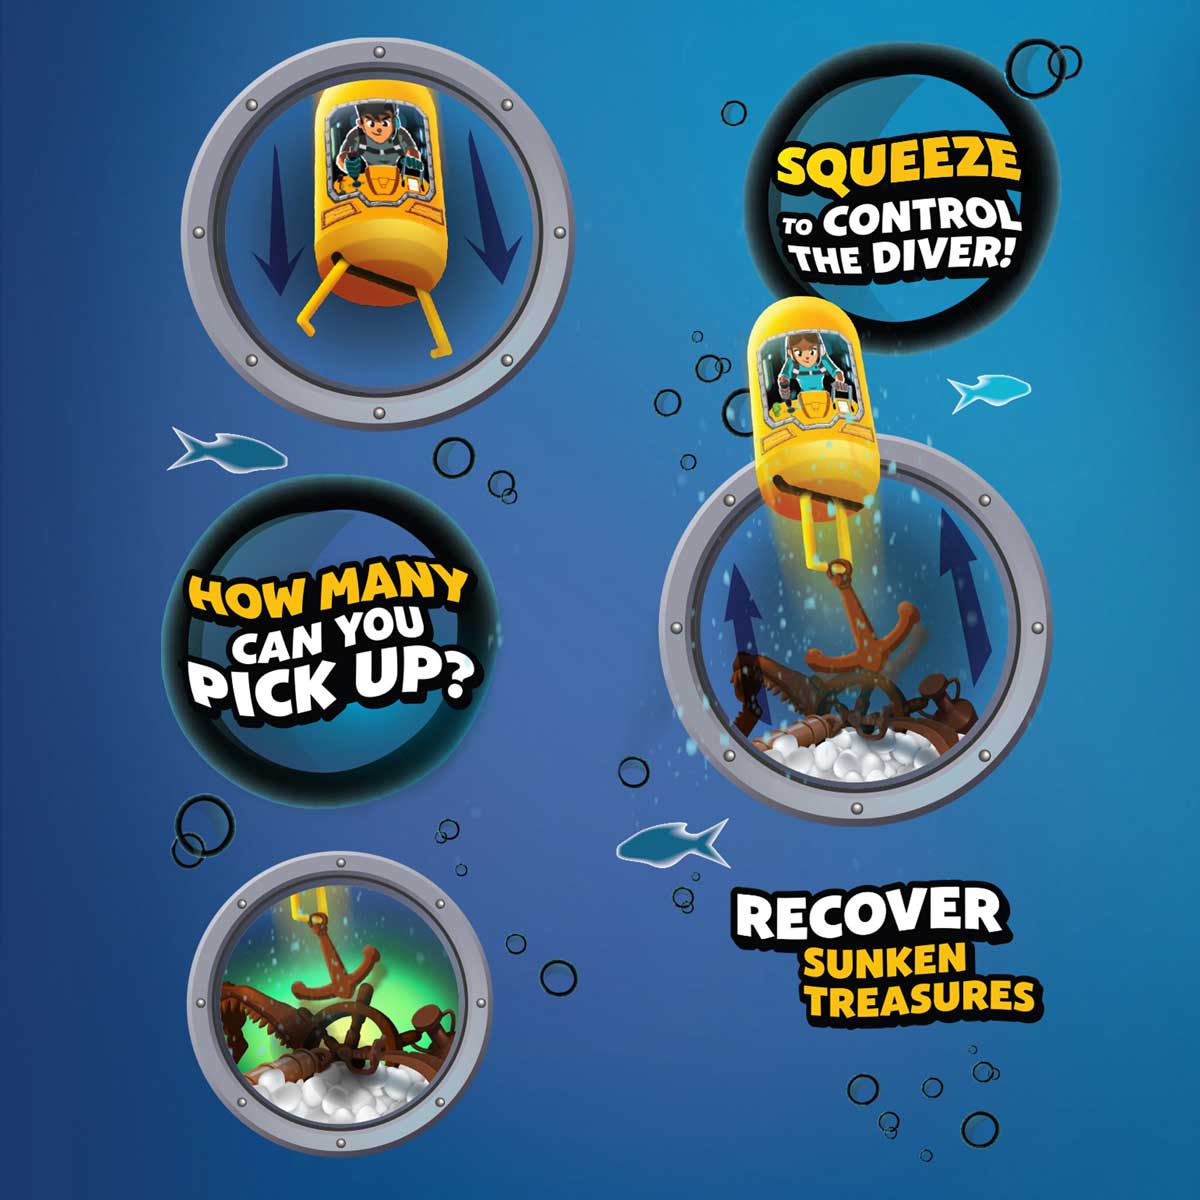 The Clawsome Treasure Diver STEM toy operates by squeezing it, which opens the jaws of the diver and allows it to sink to the bottom to collect treasure! Stop squeezing to close the jaws and grab the treasure. 